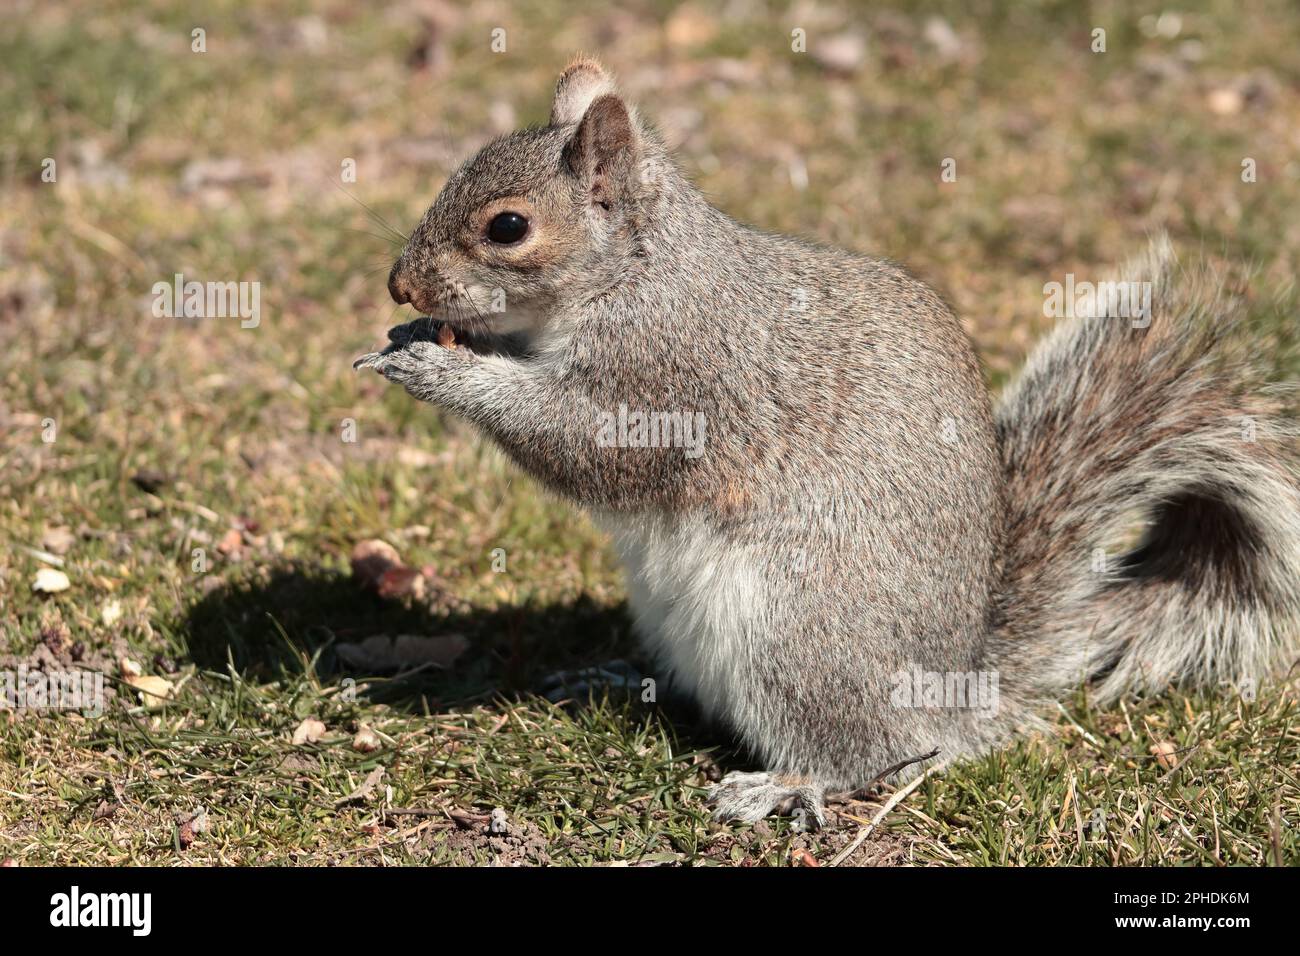 Up close shots of Wild Squirrel foraging Stock Photo